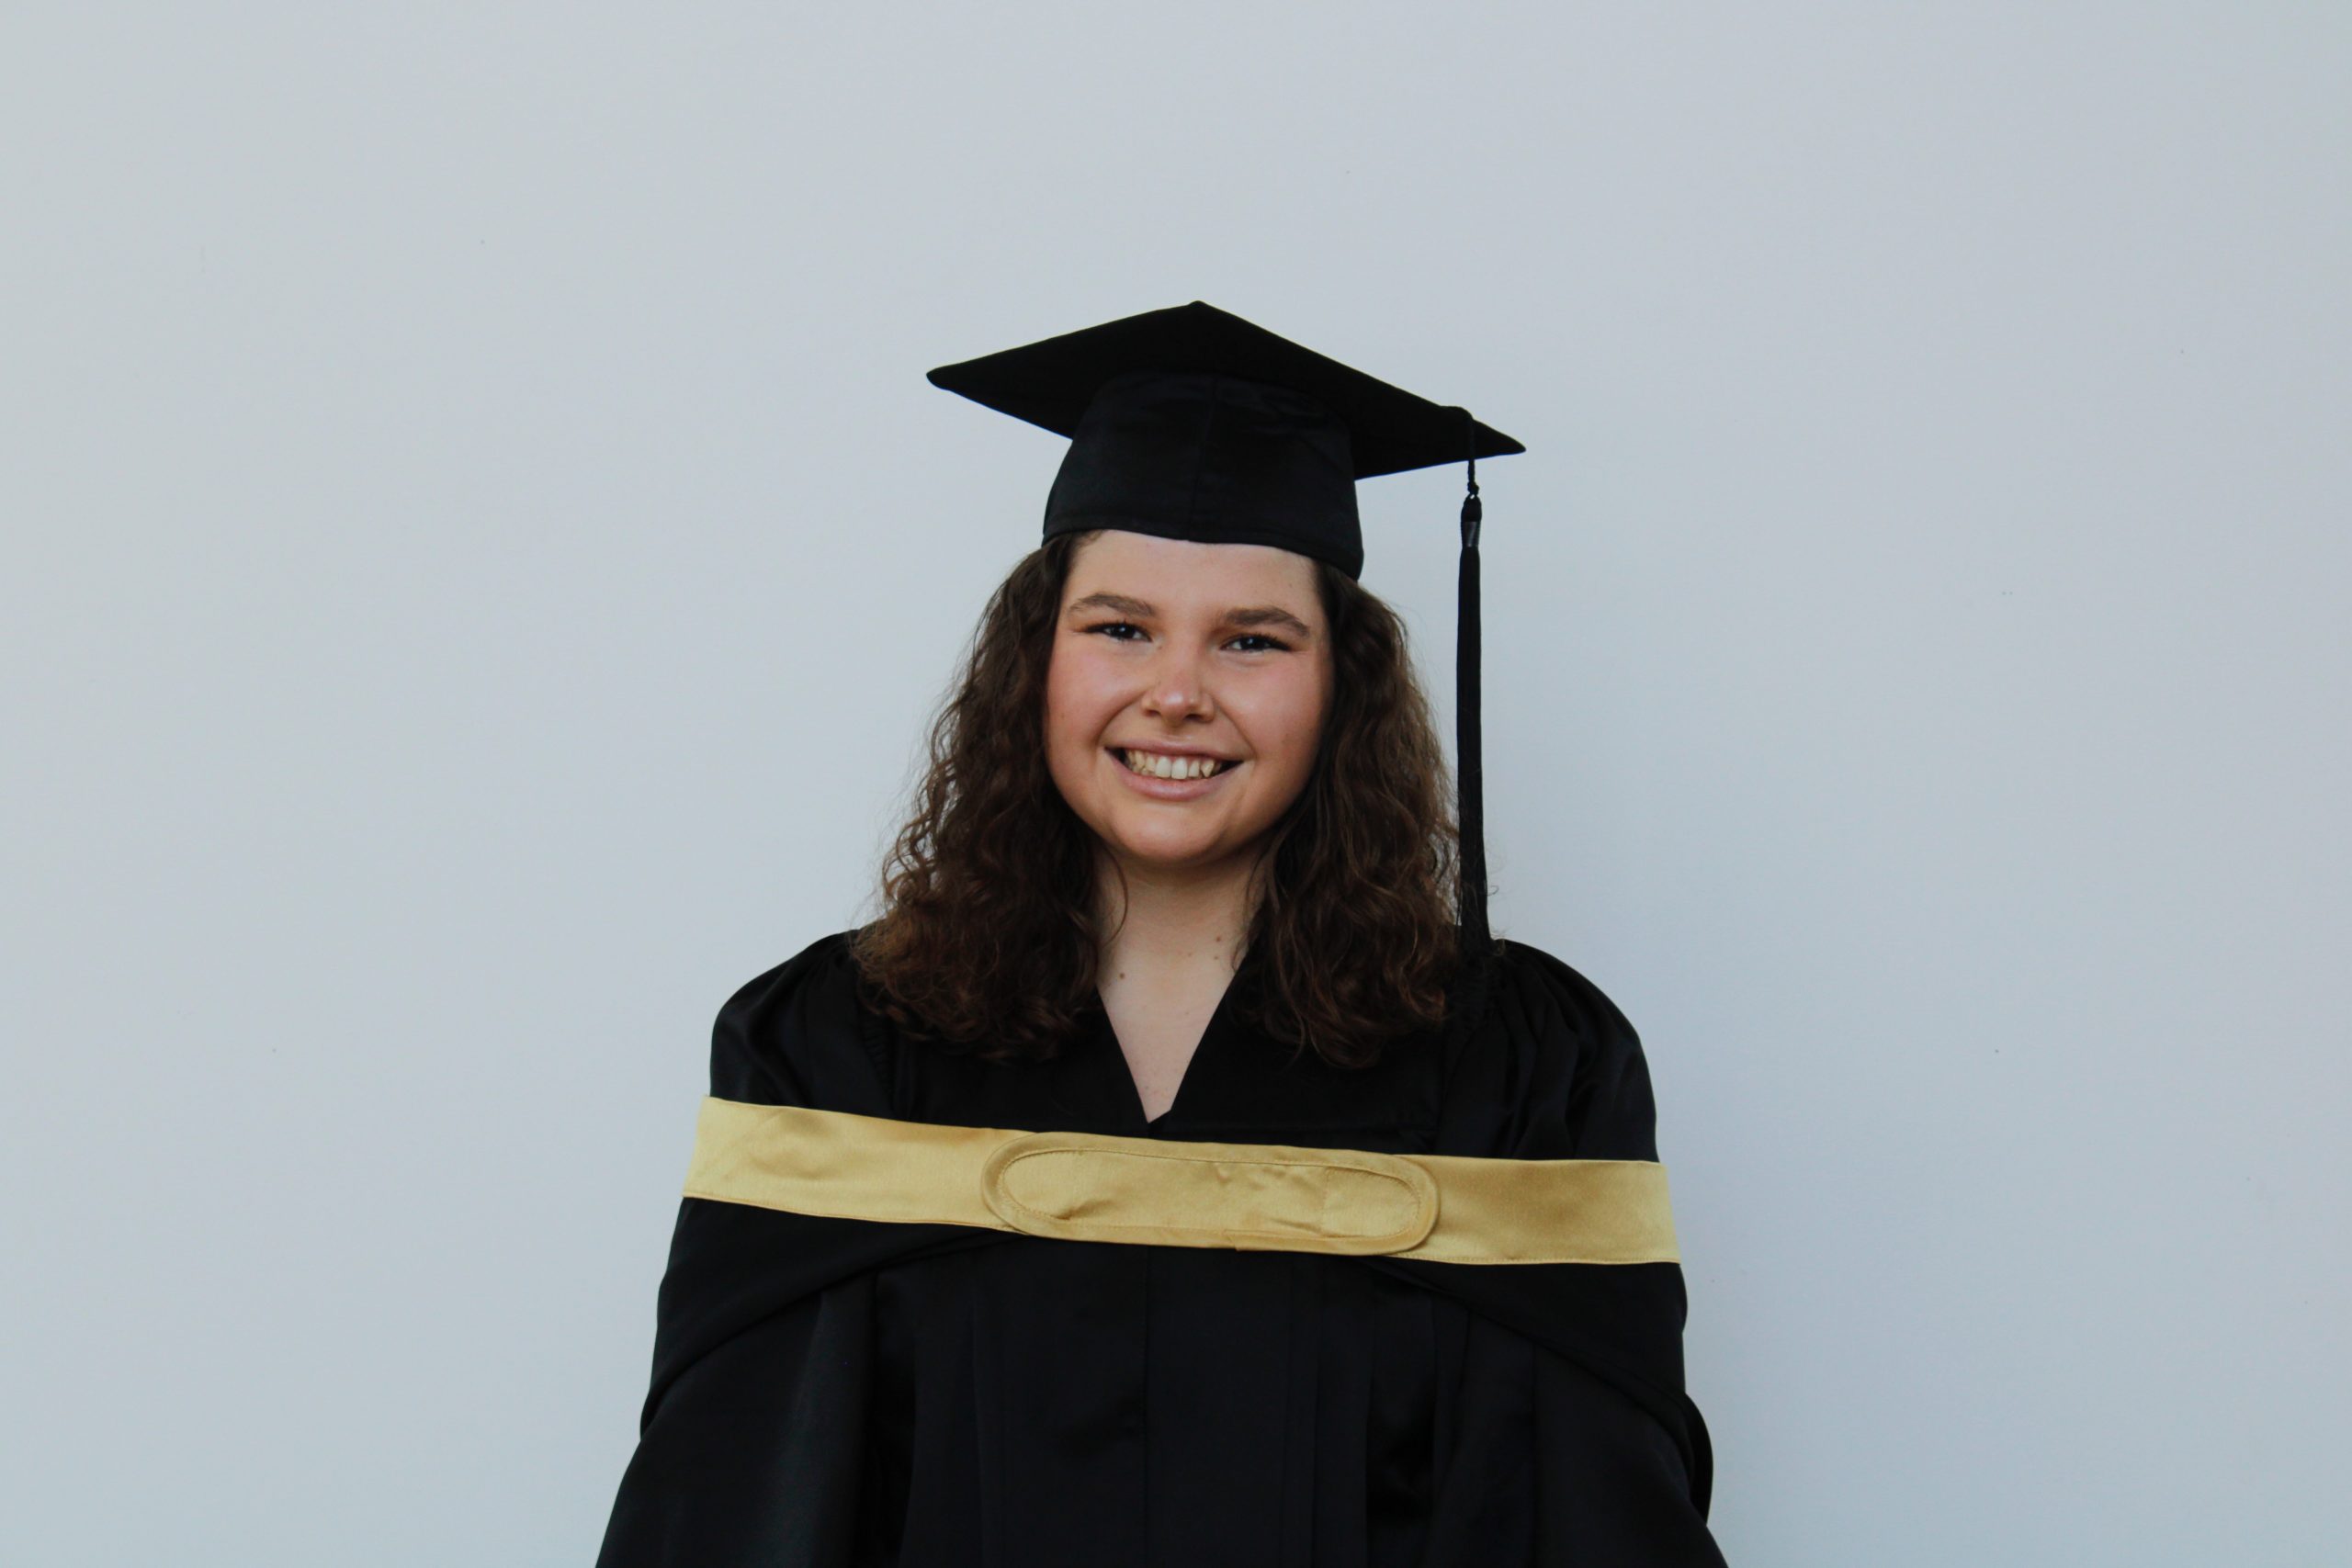 Congratulations Maggie on being awarded a NSERC Canada Graduate Scholarship-Master’s award! Well done!